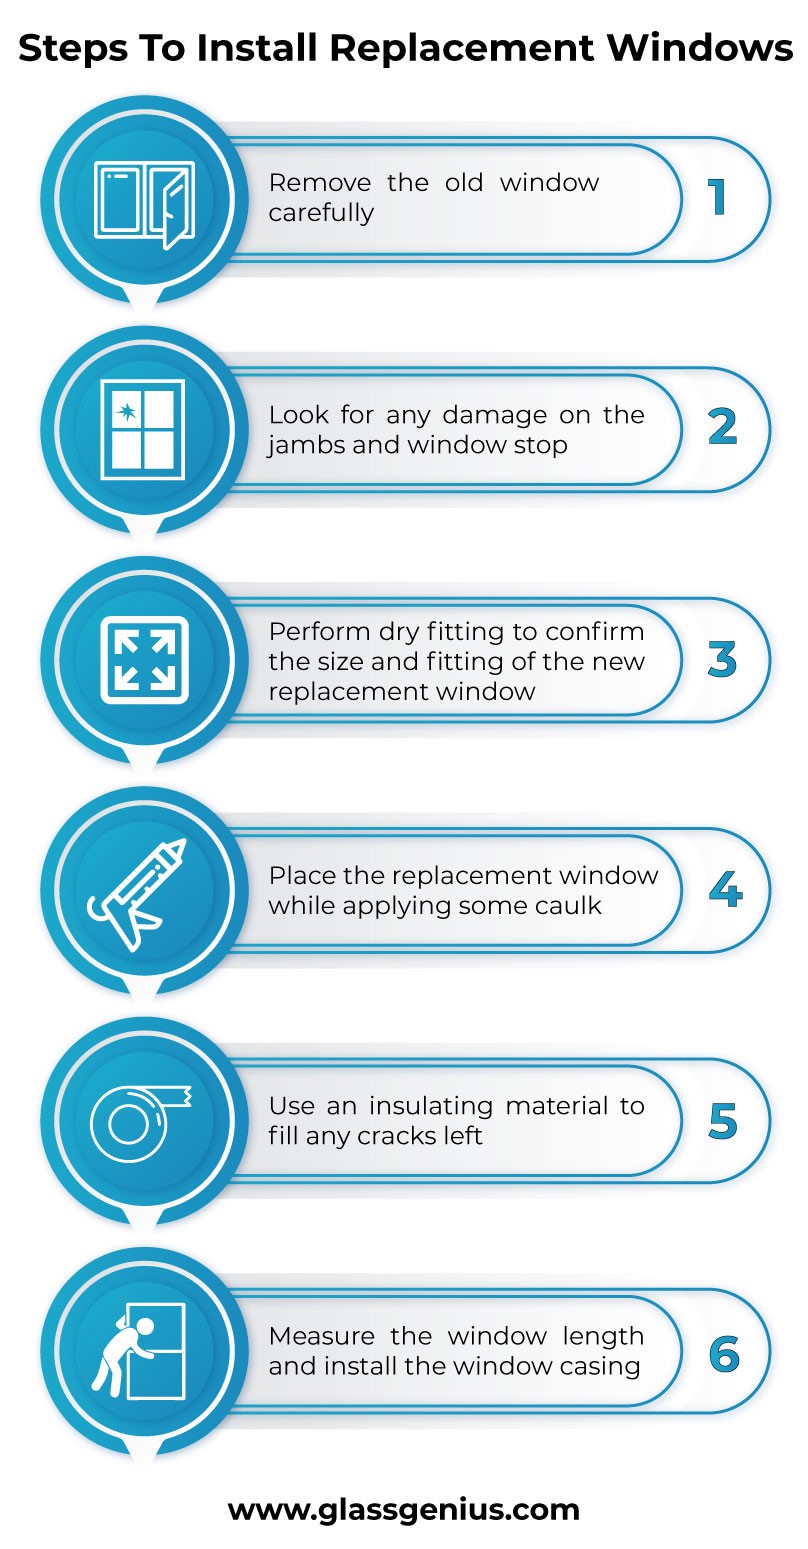 Steps to install replacement windows